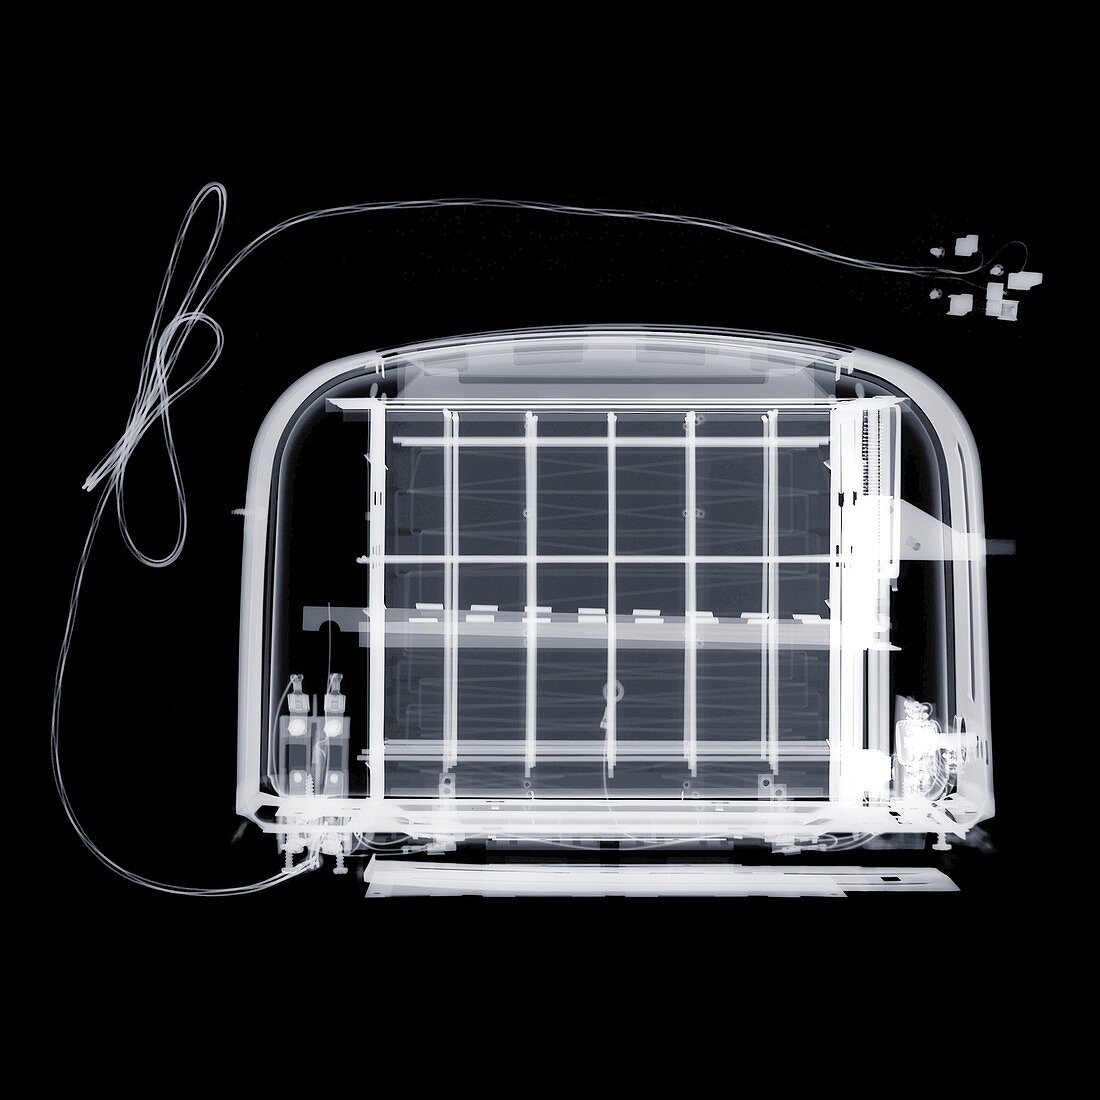 Electric toaster, X-ray